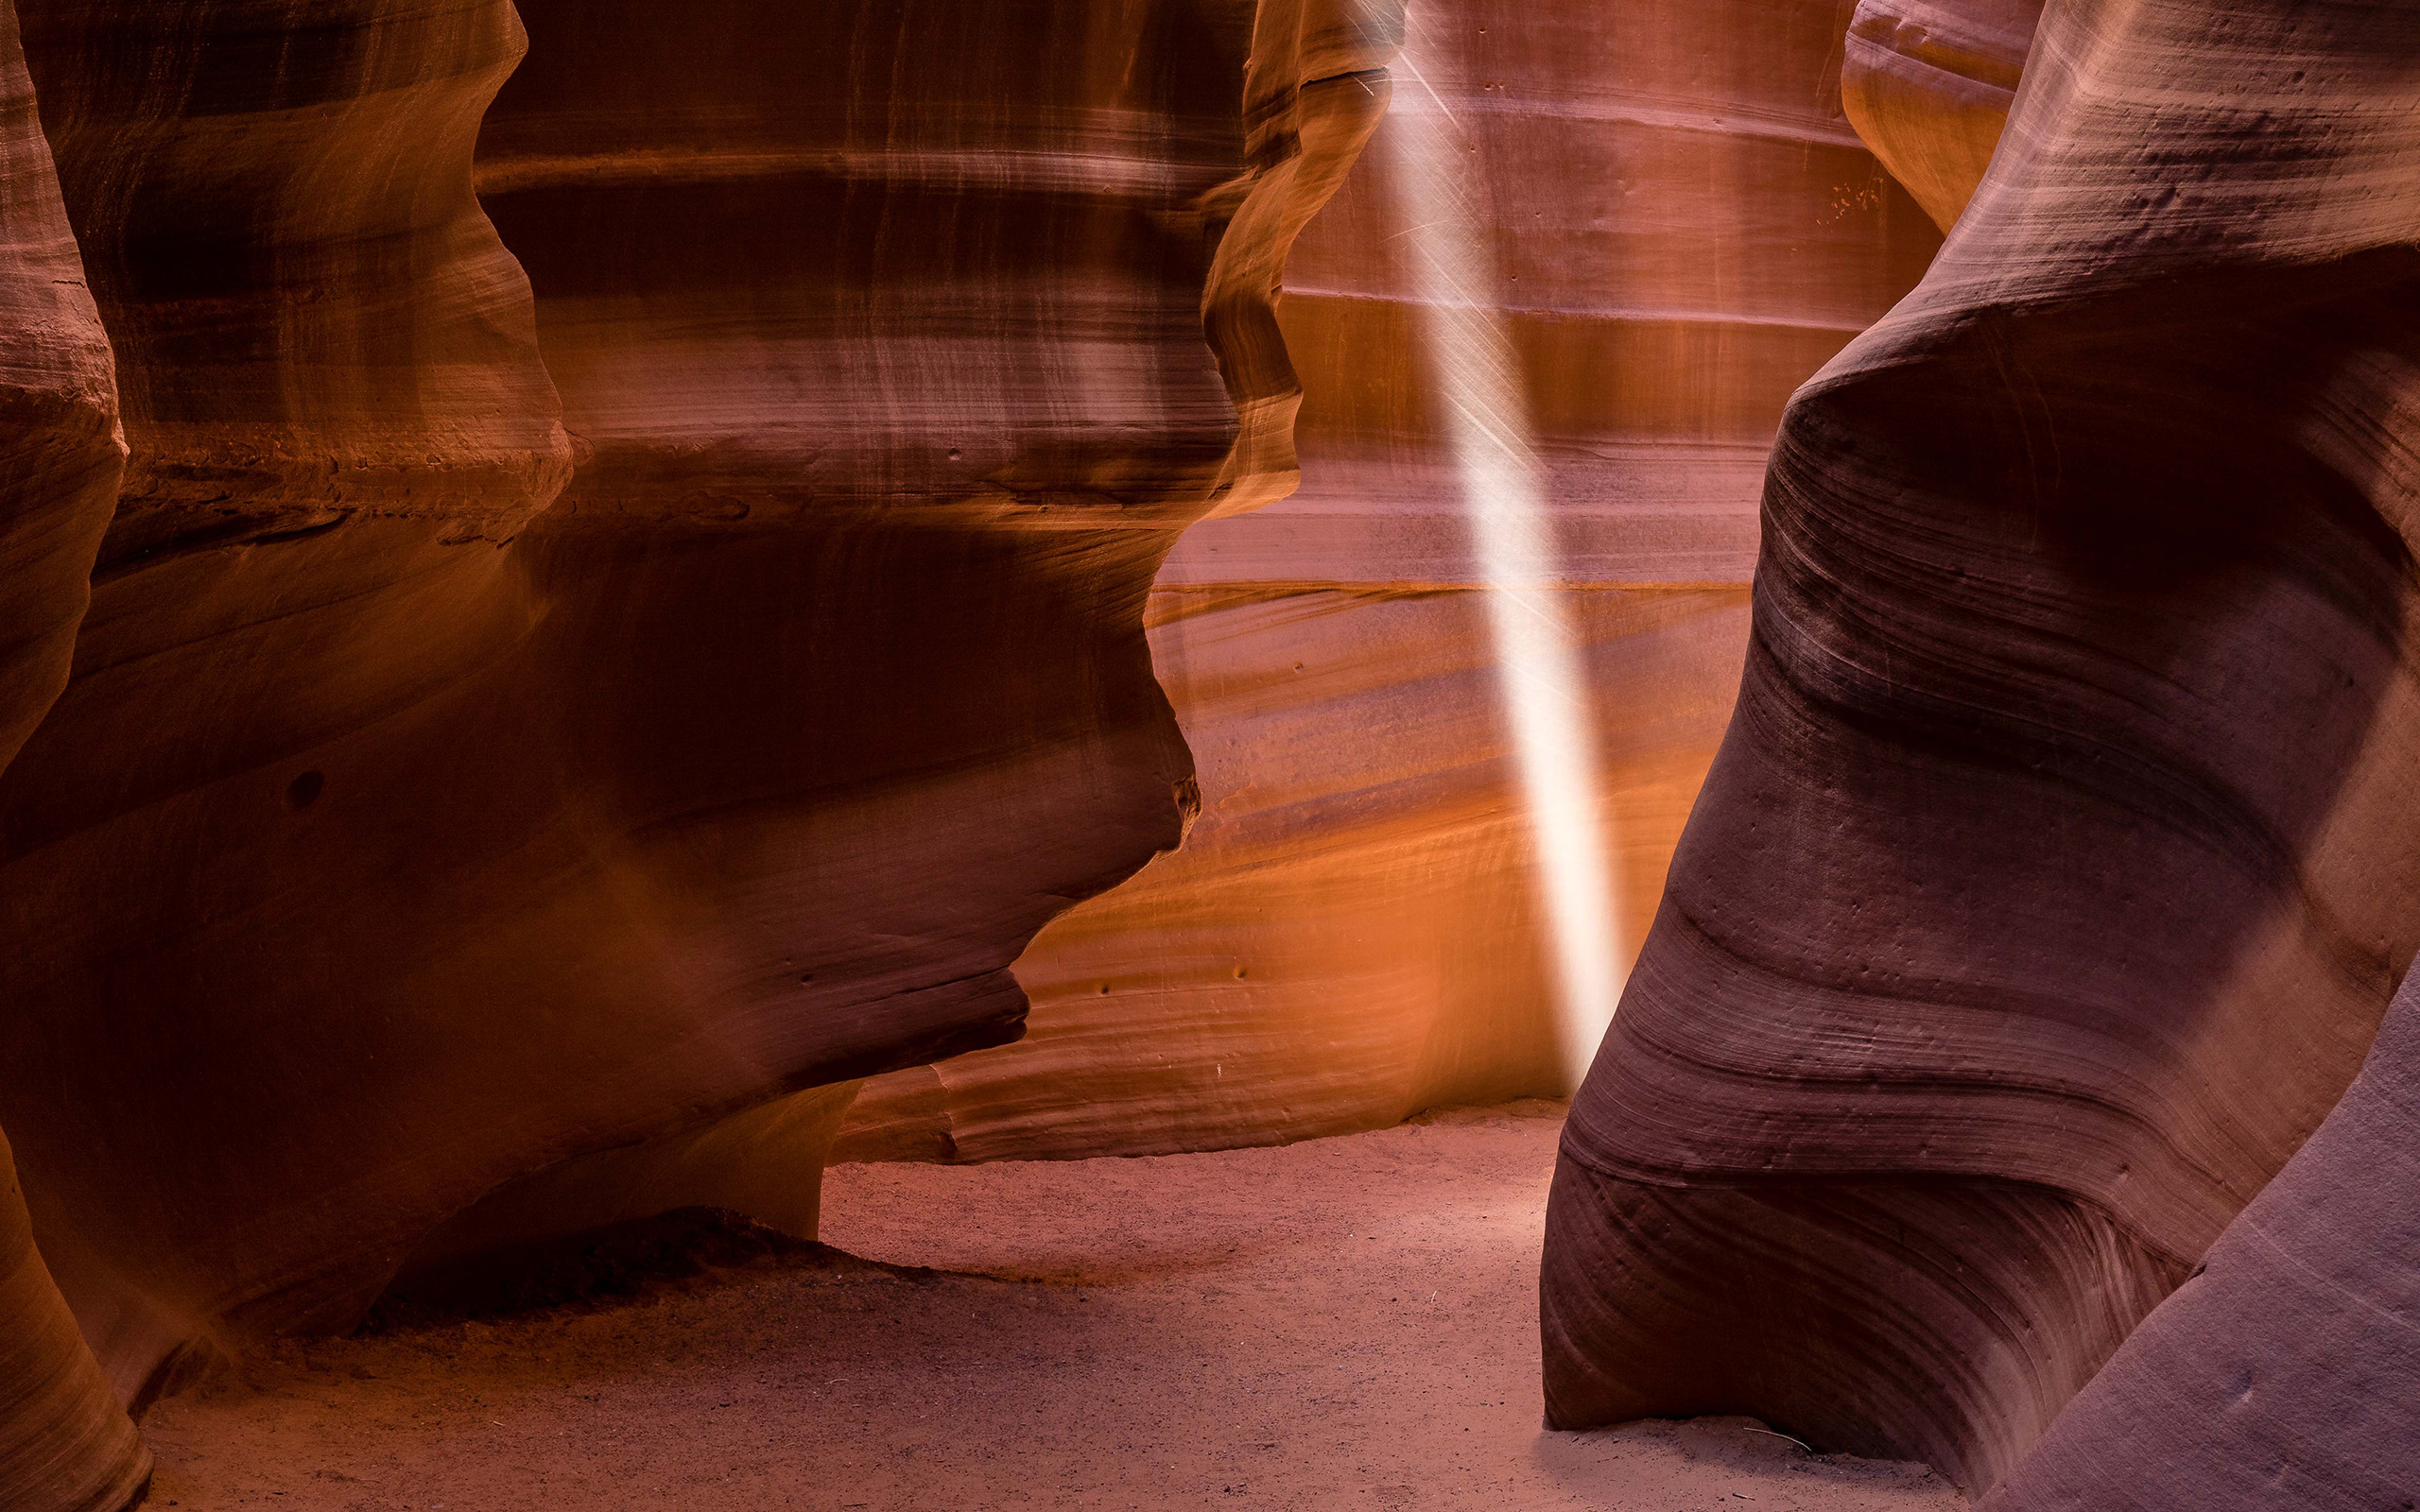 PC Wallpapers earth, antelope canyon, canyon, sandstone, sunbeam, canyons